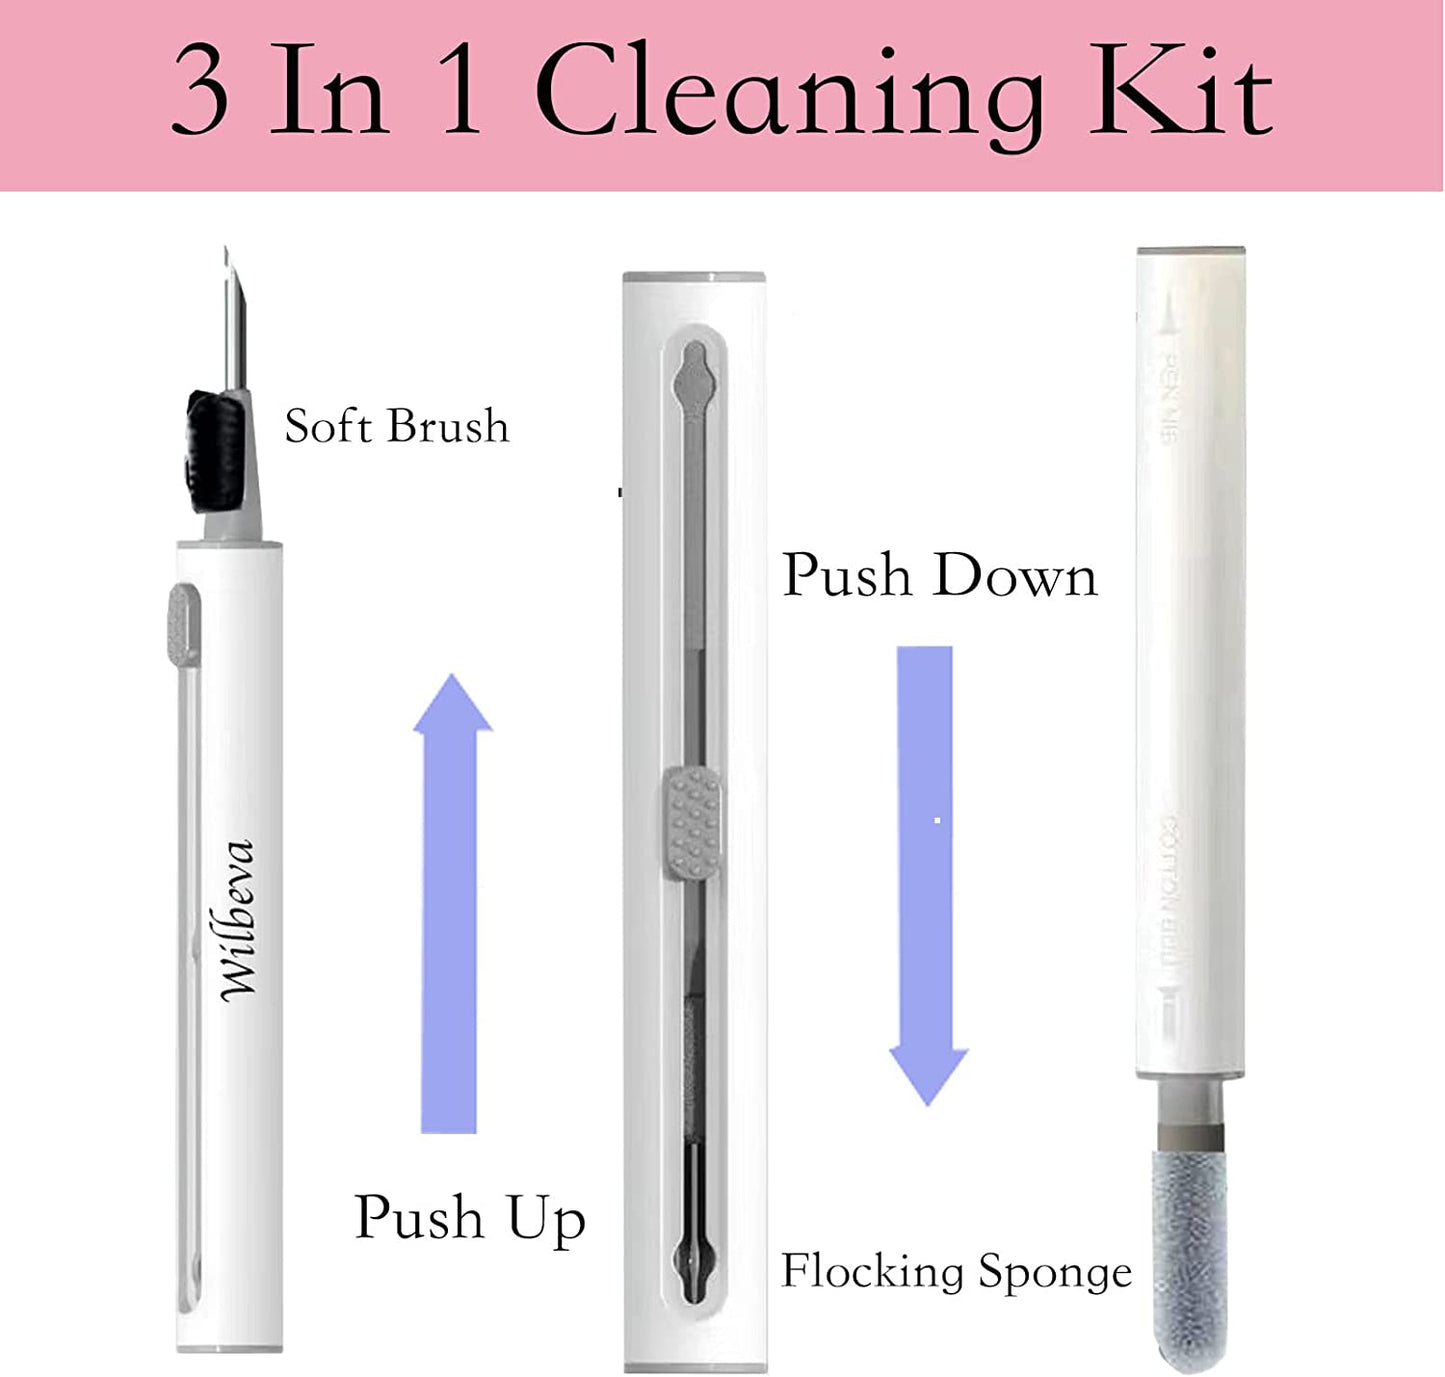 A 3 in 1 AirPod cleaning pen showing how to access the soft brush and sponge.